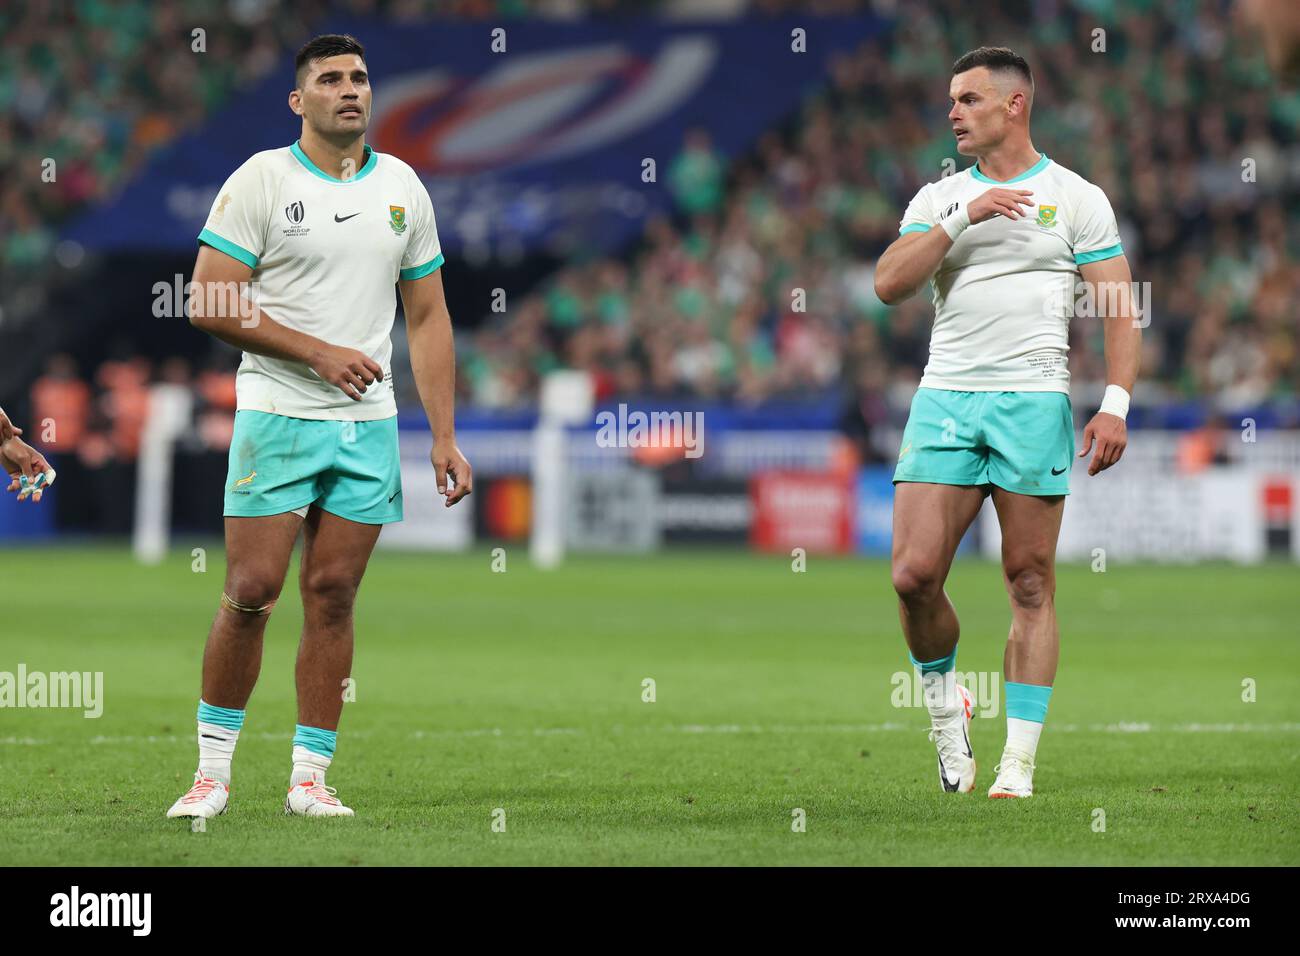 South Africa's Damian de Allende(L) Jesse Kriel during the 2023 Rugby World Cup Pool B match between South Africa and Ireland at the Stade de France in Saint-Denis, outside Paris, Saturday, Sept. 23, 2023. Credit: Aki Nagao/AFLO/Alamy Live News Stock Photo